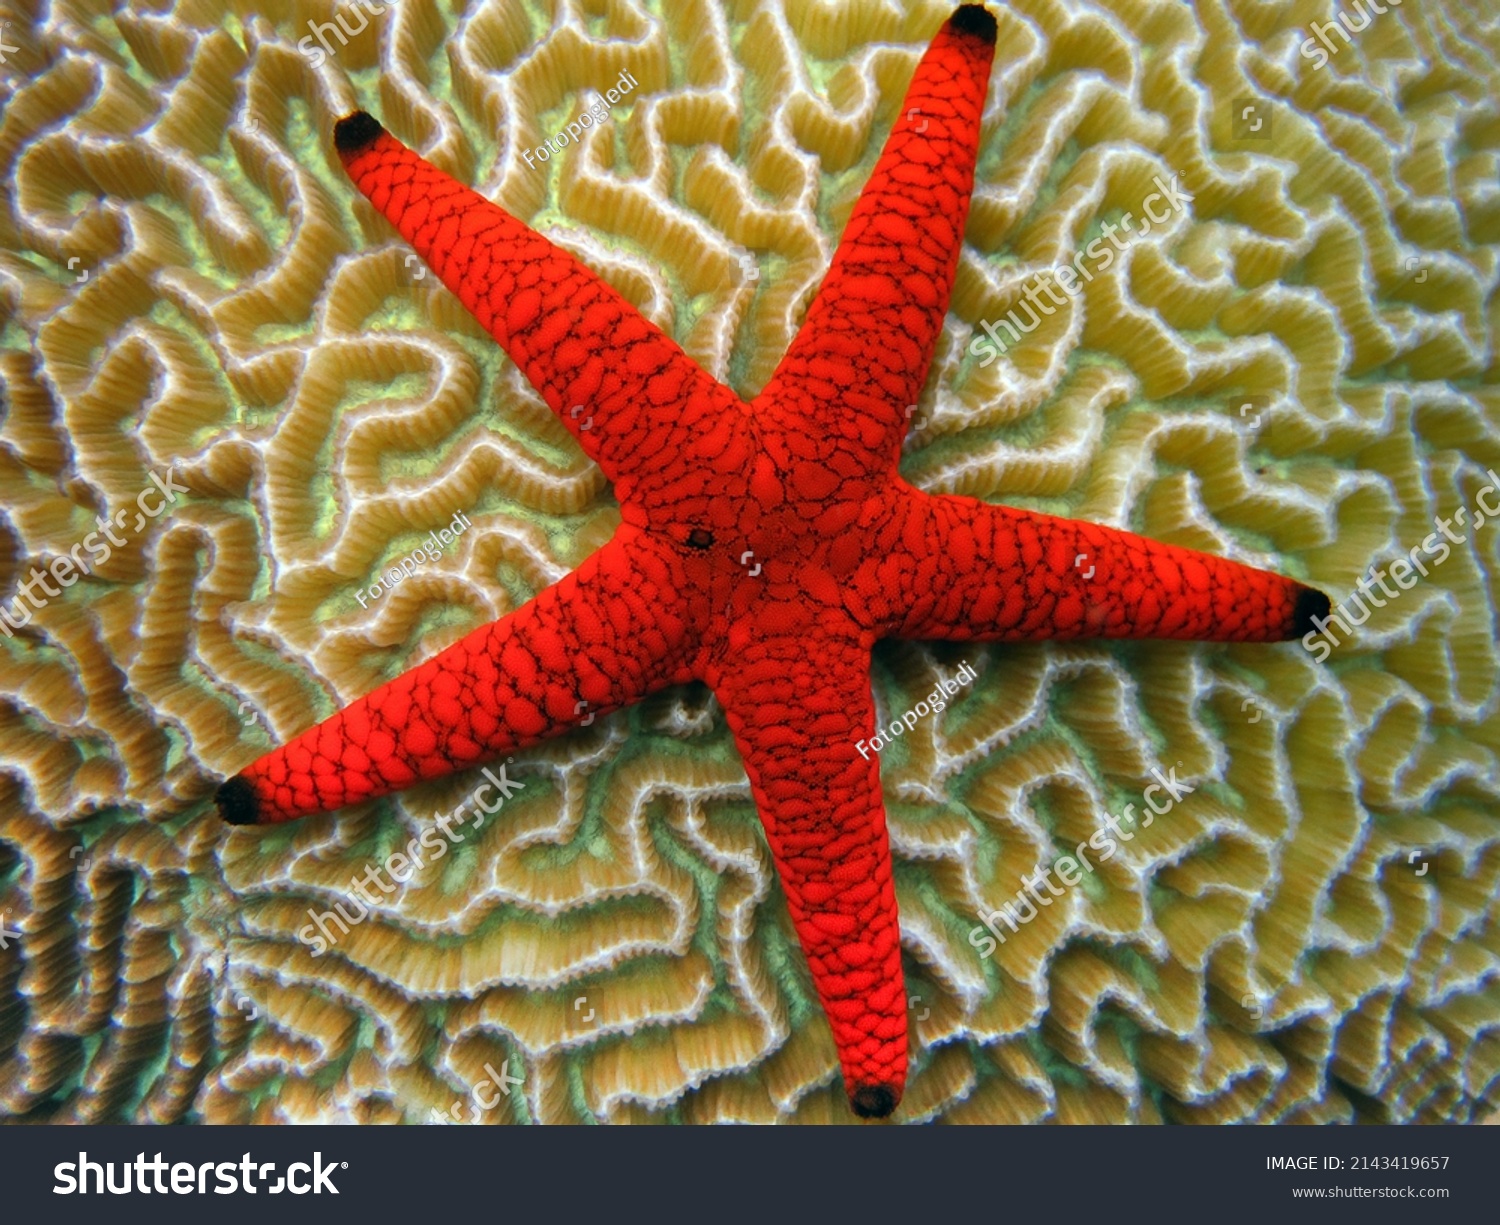 Formia Milleporella - Red Starfish - Black Spotted Starfish on a brain coral in the coral reef of Maldives. #2143419657